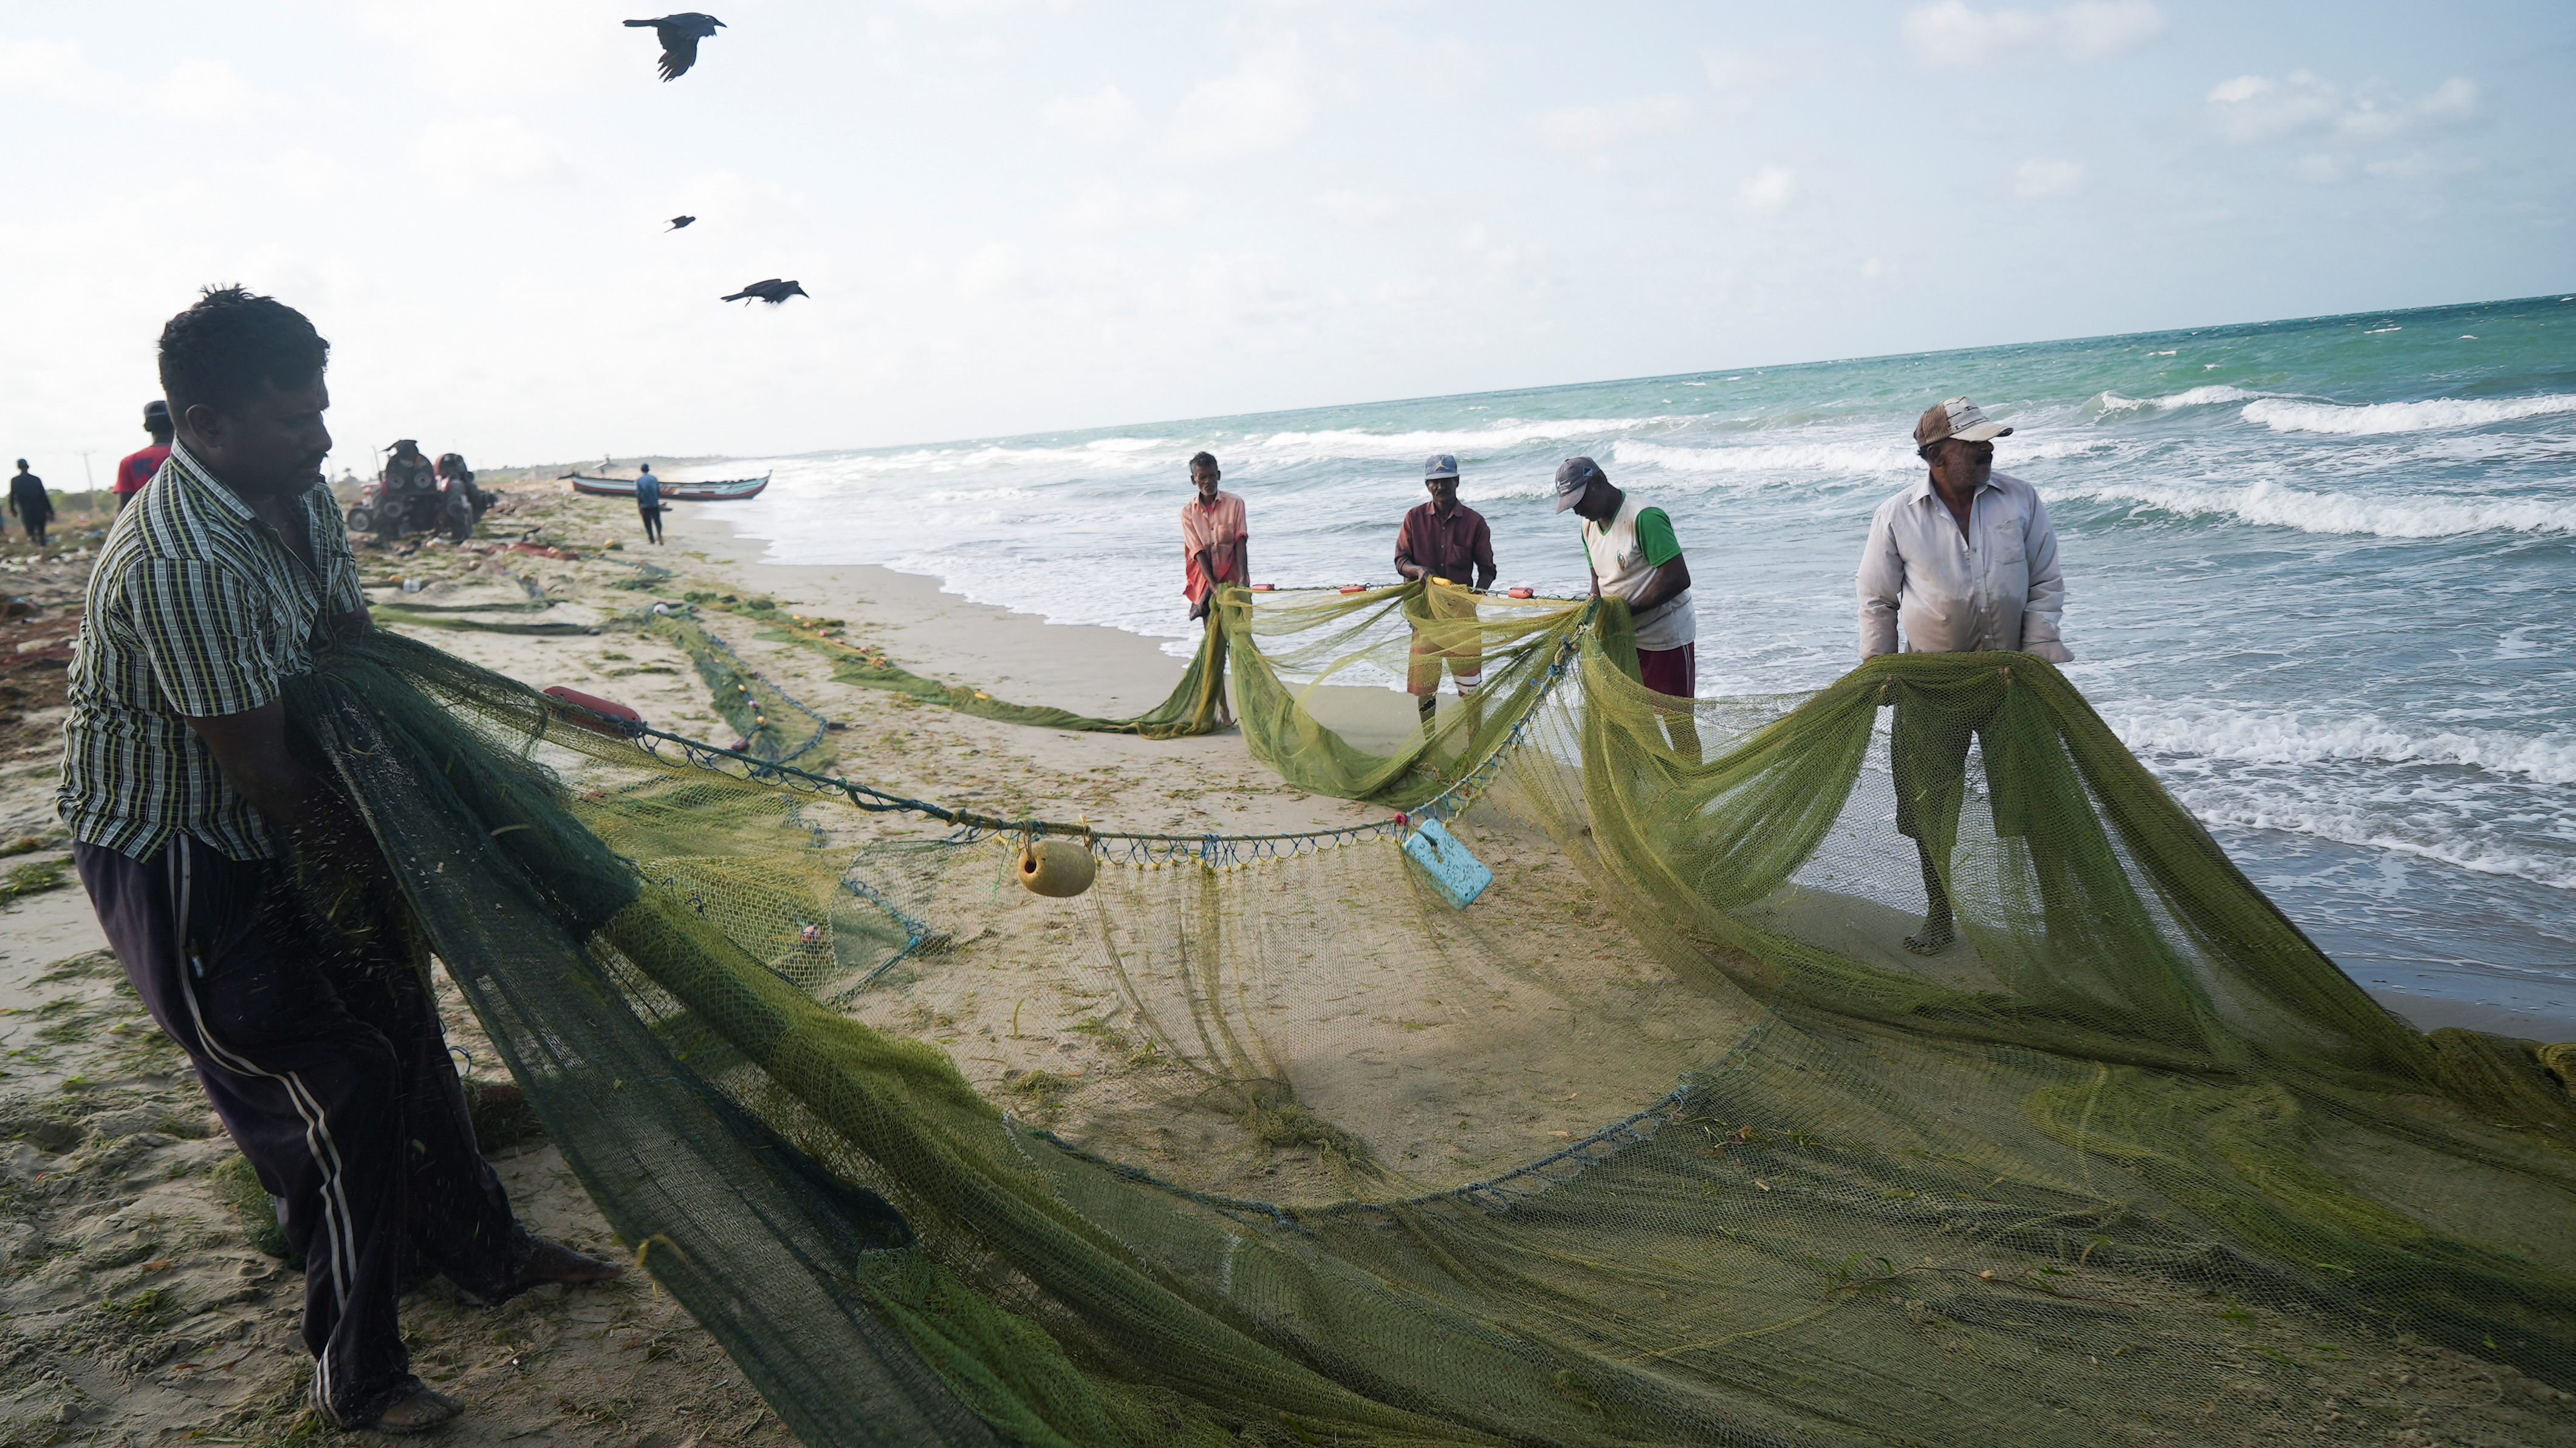 Low on petrol and resources, Sri Lankan fishermen sail against the tides to make a living